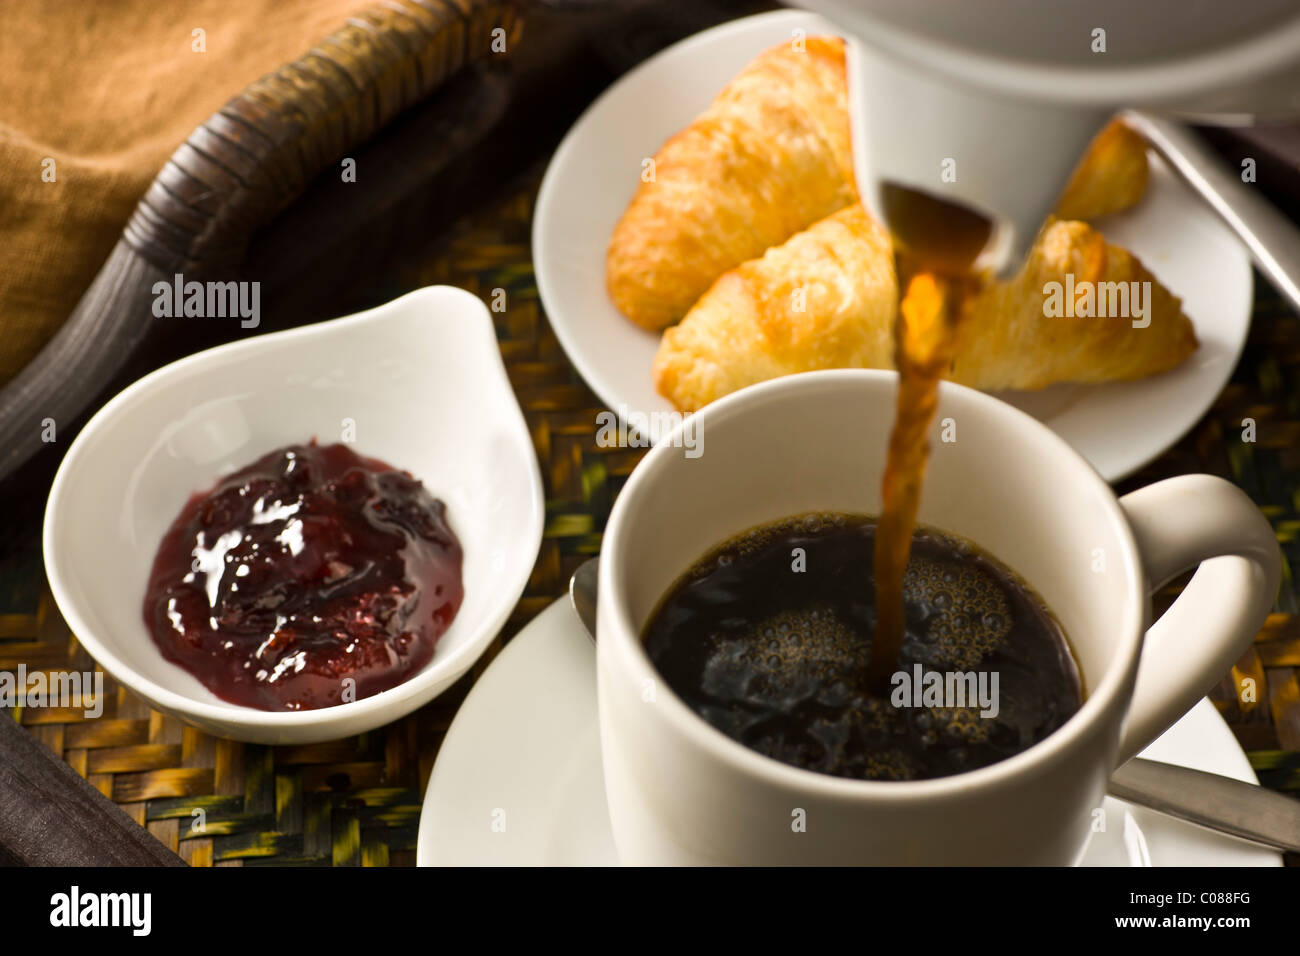 A tray with croissants, jam and a cup of hot black coffee being poured Stock Photo